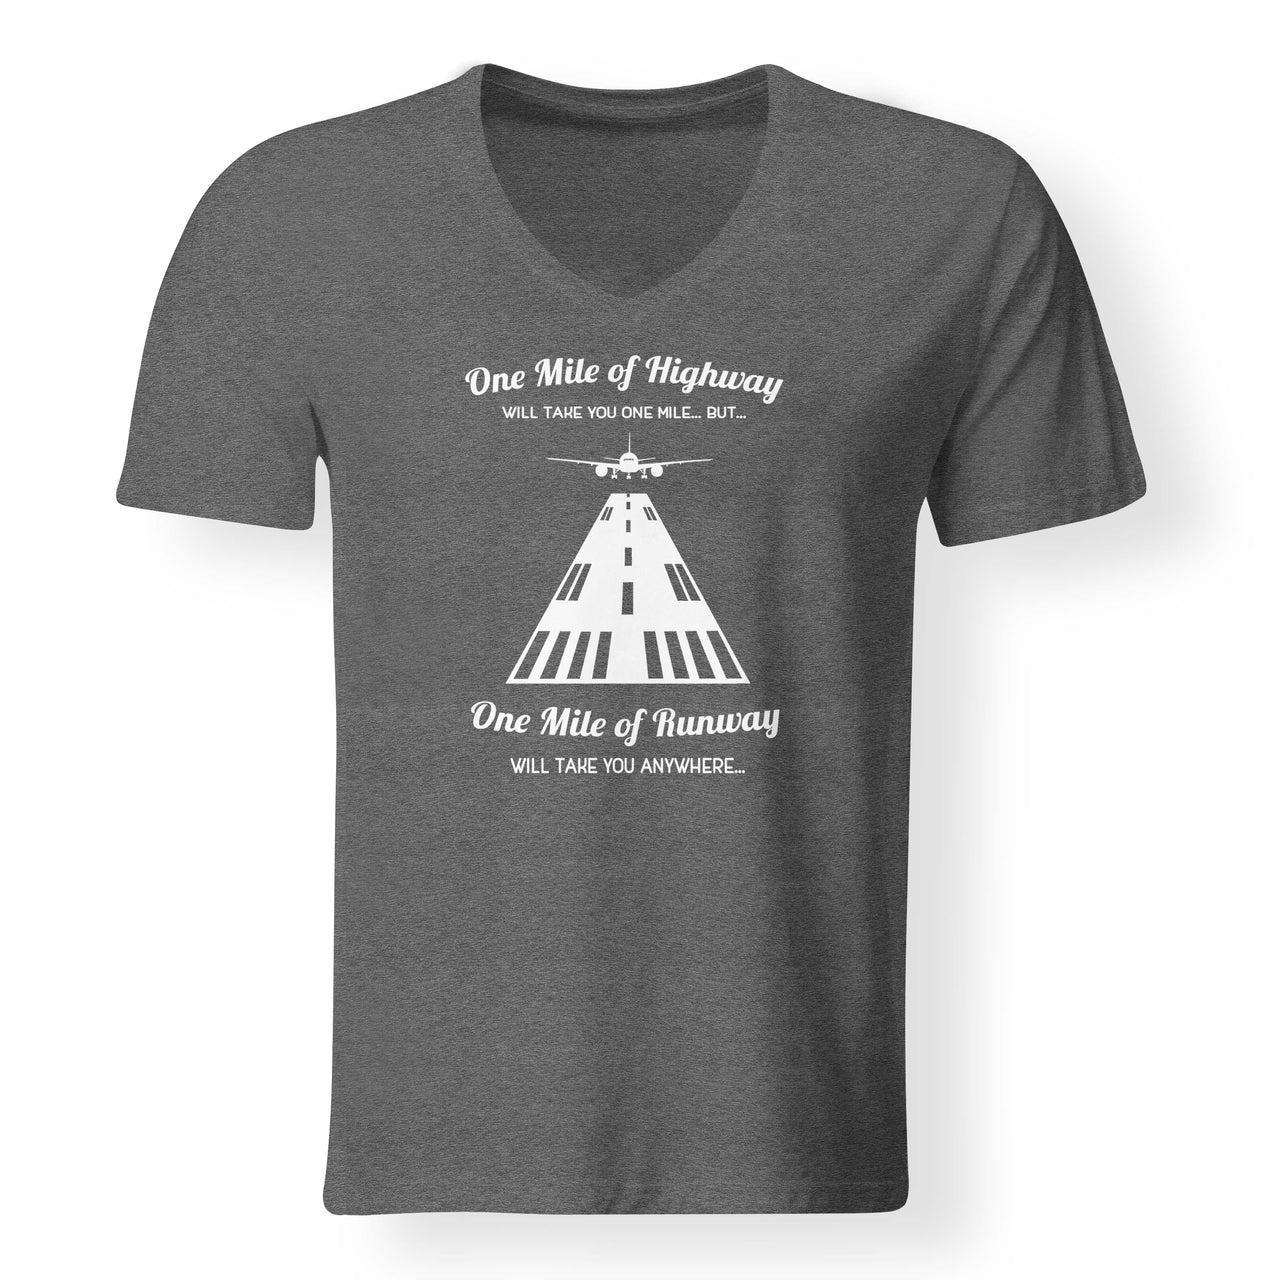 One Mile of Runway Will Take you Anywhere Designed V-Neck T-Shirts